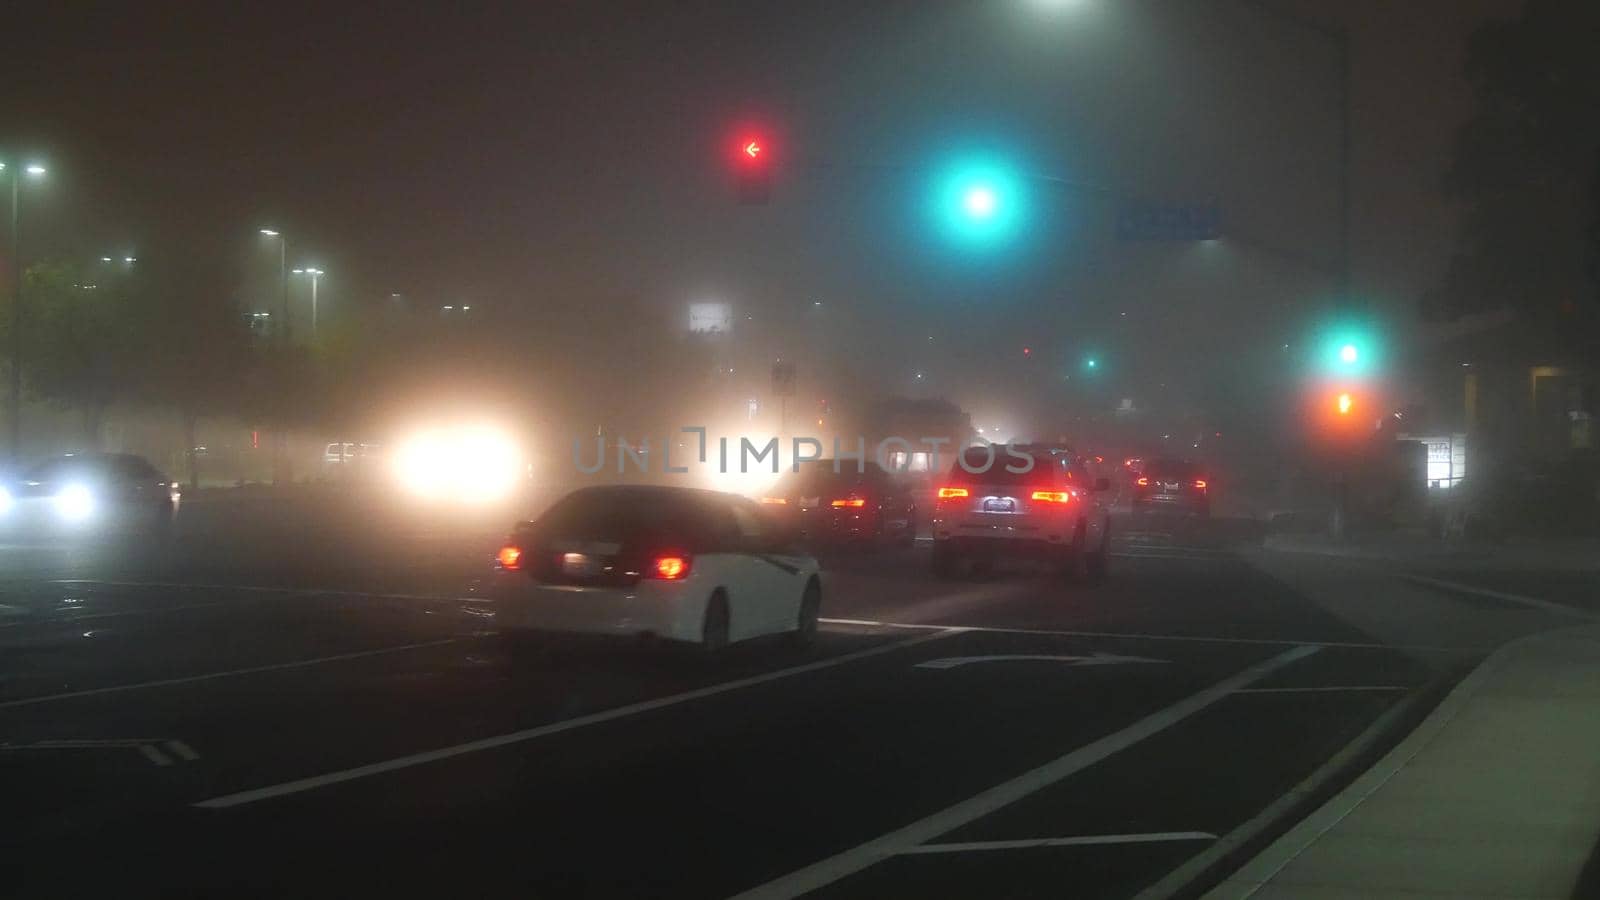 VISTA, CALIFORNIA USA - 24 JAN 2020: Marine layer, dense fog on driveway crossroad at night. June gloom, misty nebulous bad weather. Dangerous low visibility on road intersection. Car traffic safety.